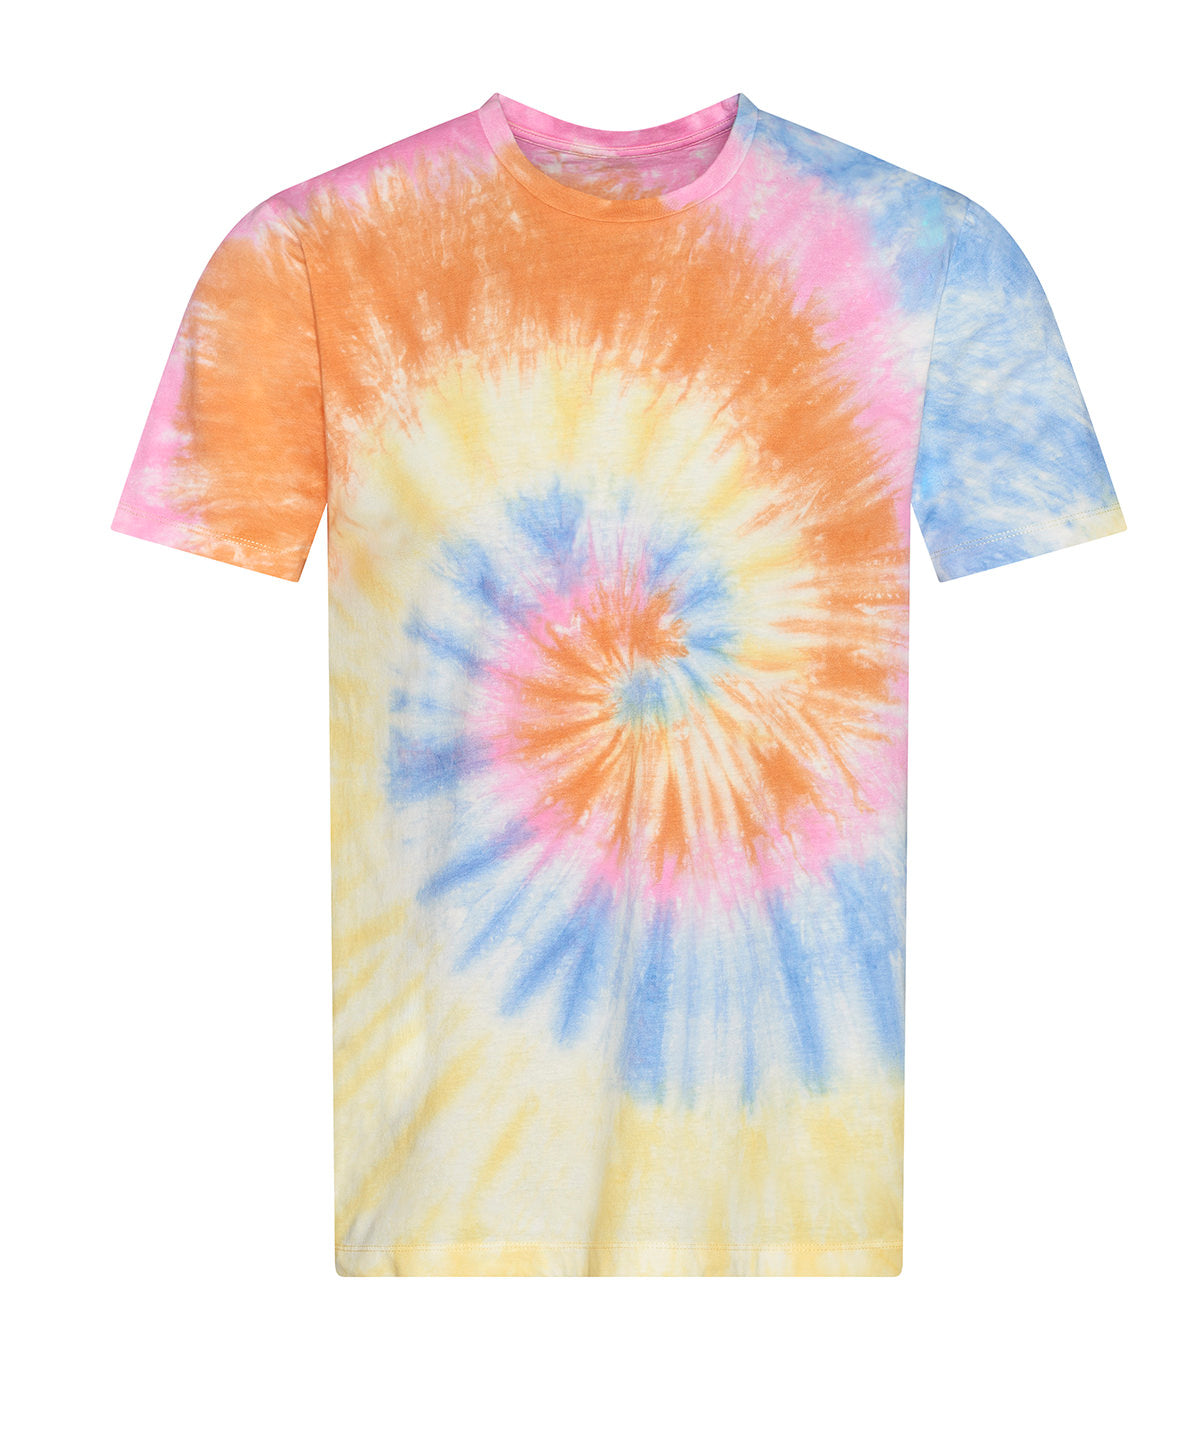 Personalised T-Shirts - Light Blue AWDis Just T's Tiedye T